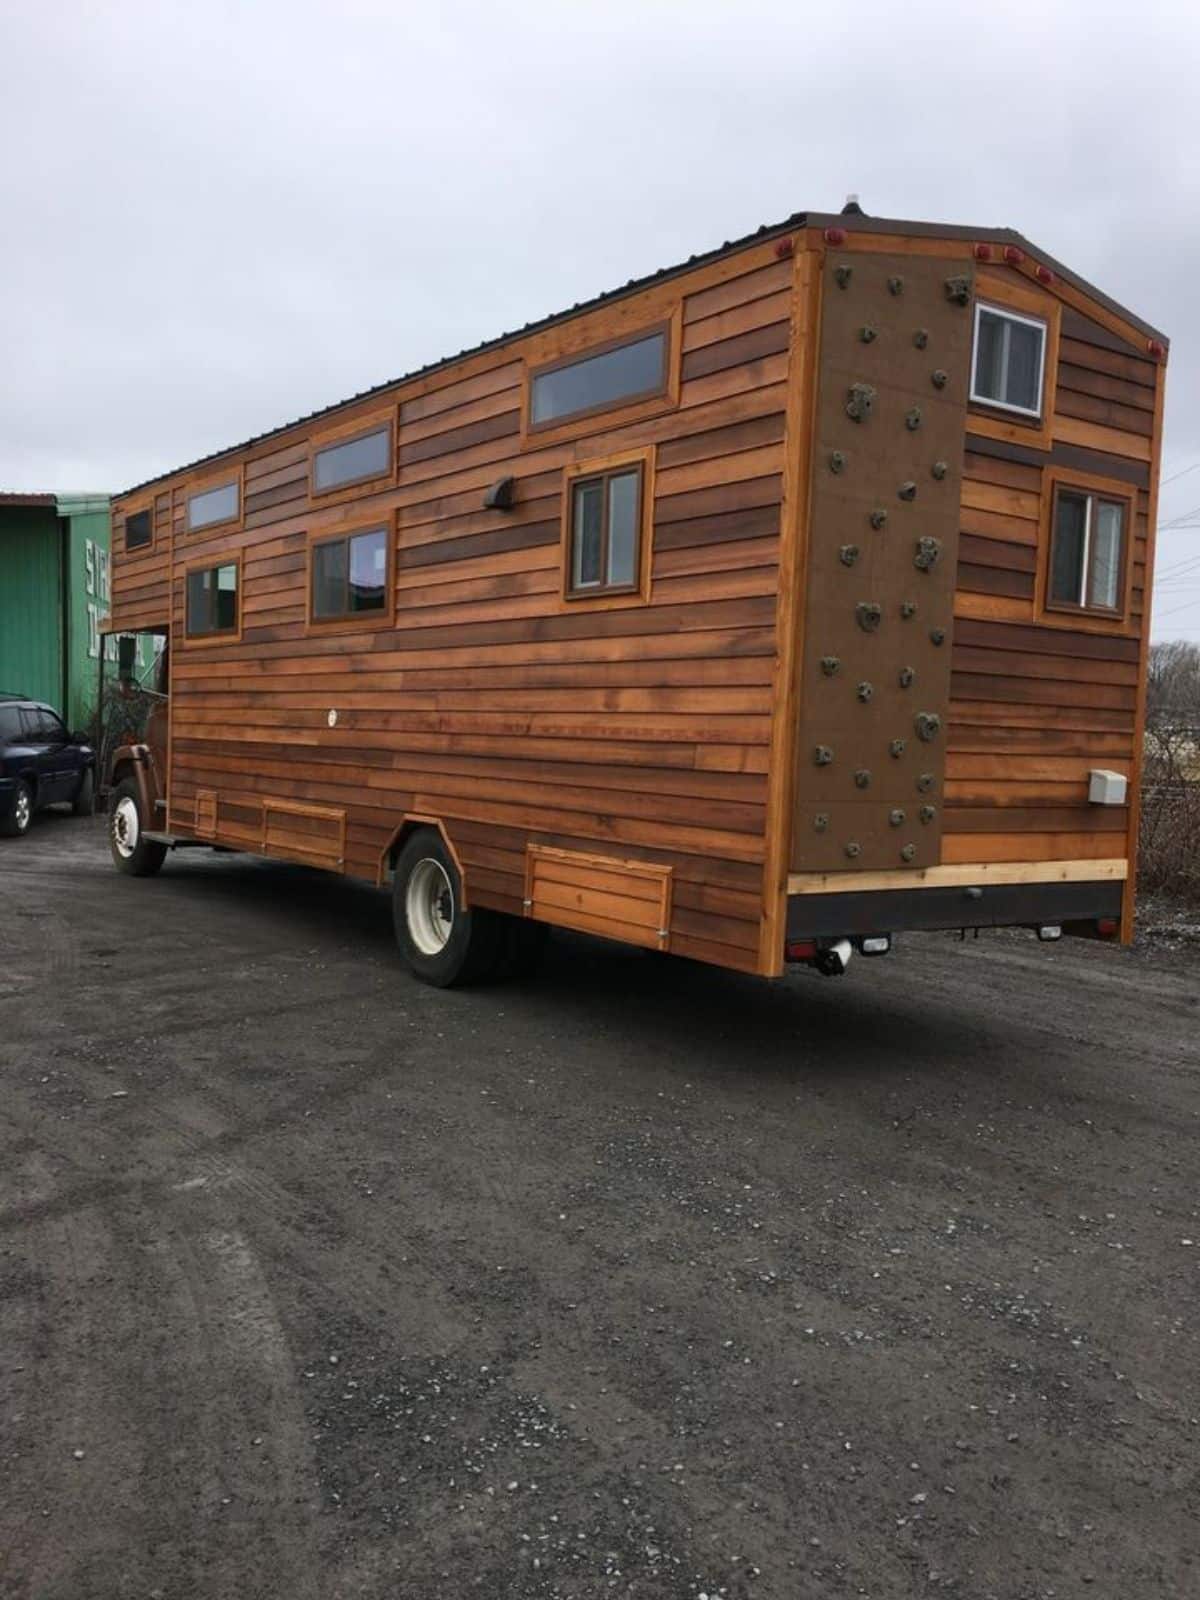 backside has a rock climbing wall and sides with multiple windows of rustic motorhome